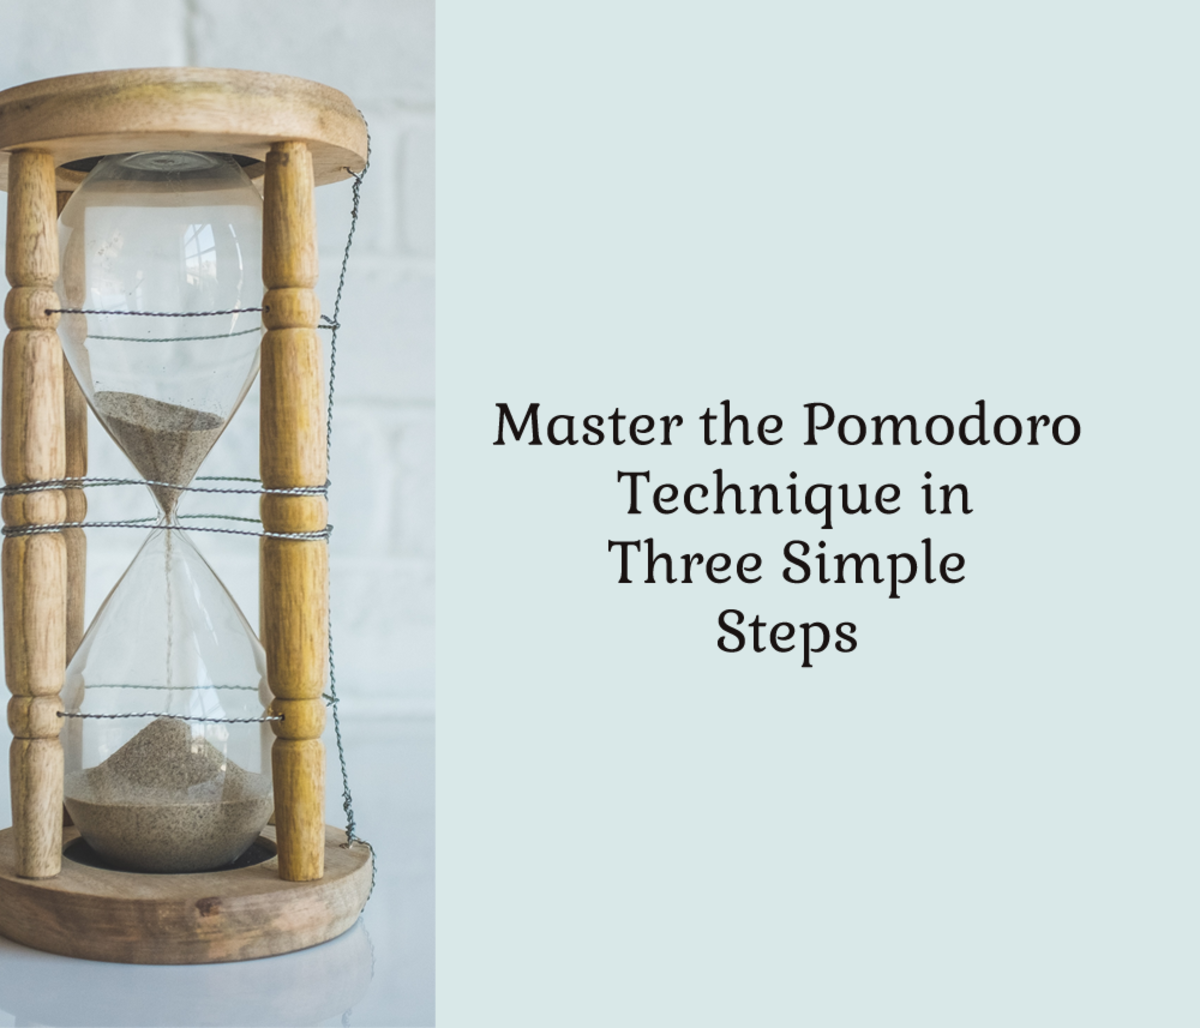 The Pomodoro Technique — Why It Works & How To Do It